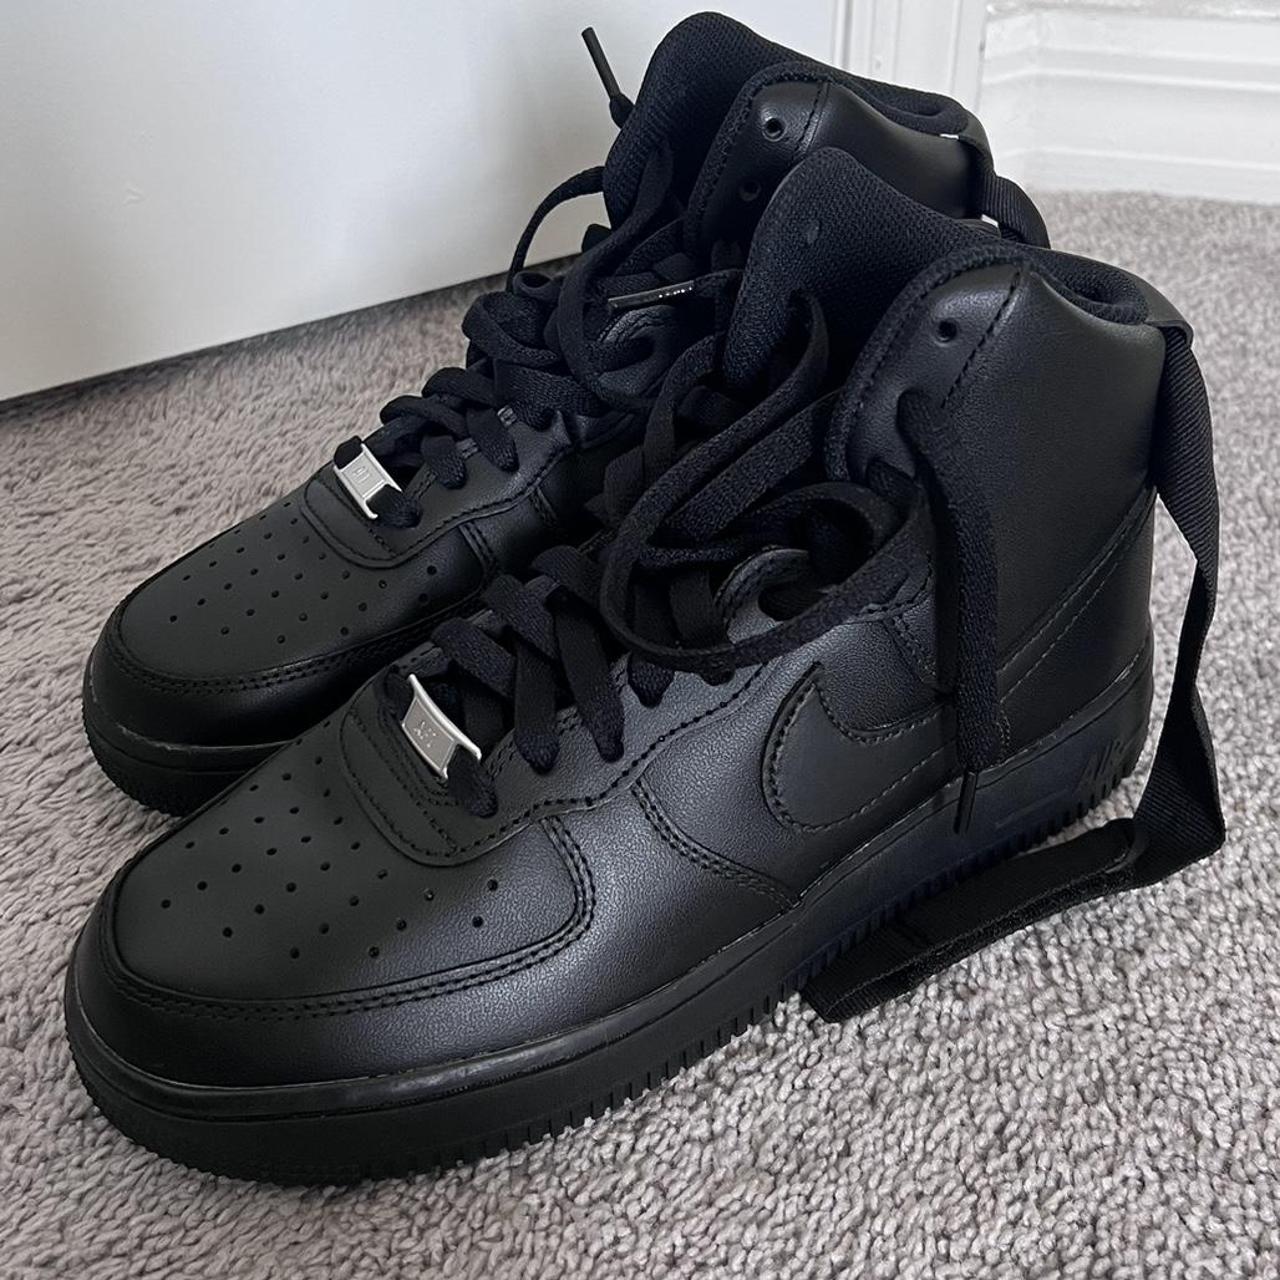 Black hightop airforce 1’s Size 9 in womens, size... - Depop